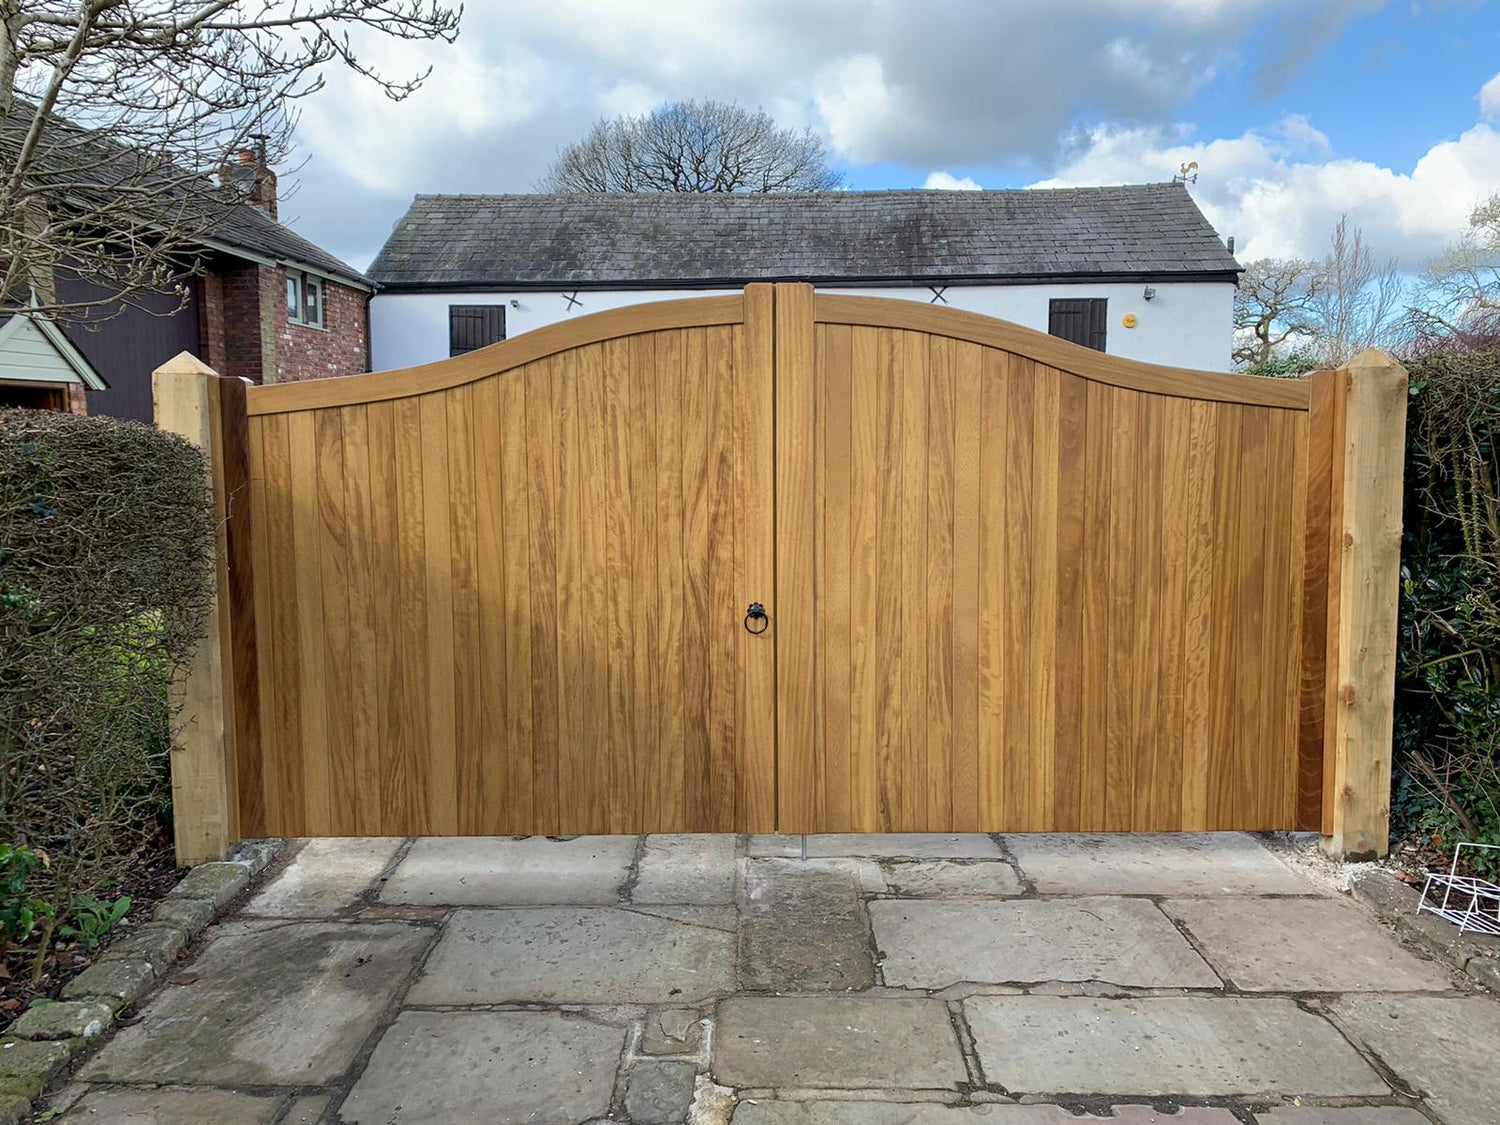 Manufacturers and suppliers of quality wooden gates